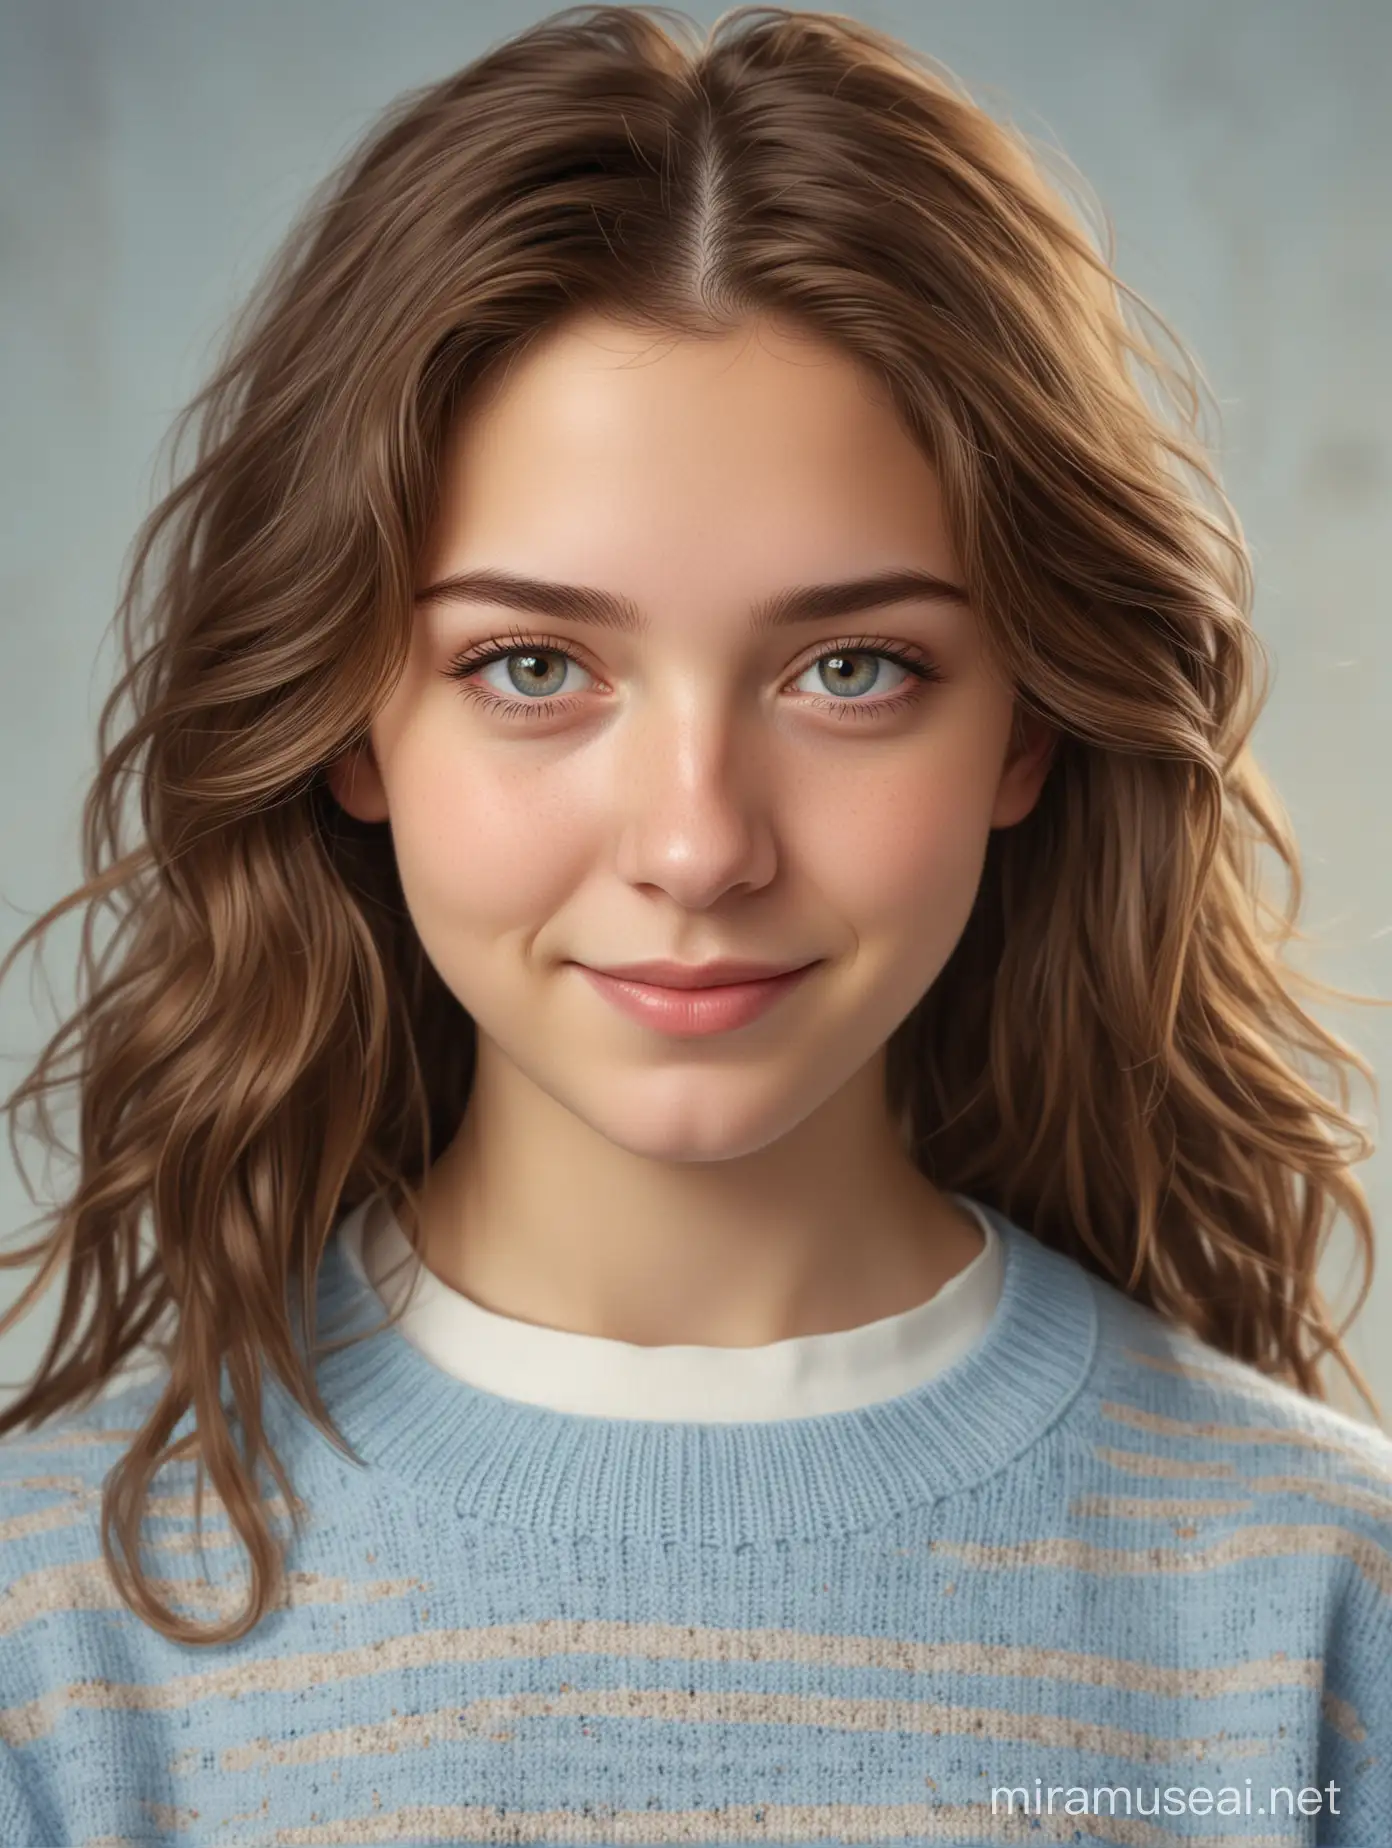 Create an ultra-realistic portrait of a teenage girl with medium-length wavy brown hair. She has fair skin and expressive hazel eyes. Her expression is calm and slightly smiling, looking directly at the viewer. The girl is wearing a light blue sweater with subtle patterns. The background is softly blurred, with a warm, neutral color palette to highlight her features. The lighting should be soft and natural, creating a gentle, serene ambiance in the portrait